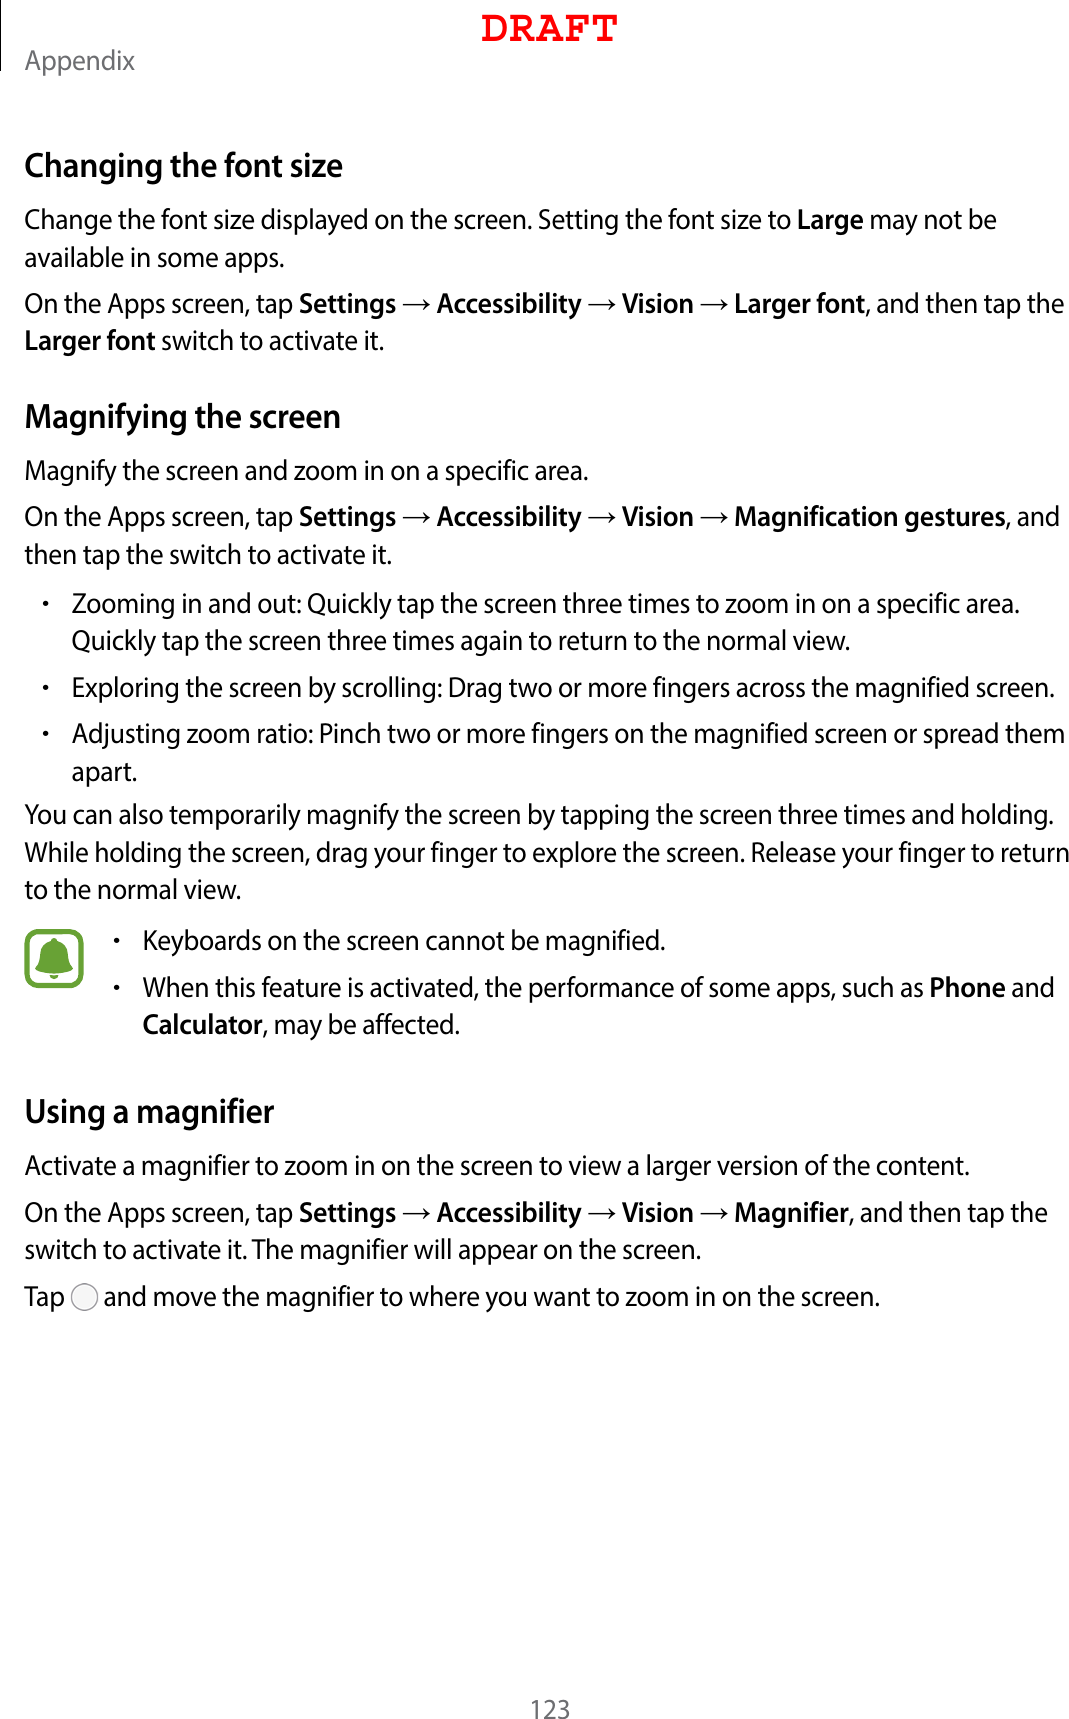 Appendix123Changing the font sizeChange the font size displayed on the screen. Setting the font size to Large may not be available in some apps.On the Apps screen, tap Settings  Accessibility  Vision  Larger font, and then tap the Larger font switch to activate it.Magnifying the screenMagnify the screen and zoom in on a specific area.On the Apps screen, tap Settings  Accessibility  Vision  Magnification gestures, and then tap the switch to activate it.•Zooming in and out: Quickly tap the screen three times to zoom in on a specific area. Quickly tap the screen three times again to return to the normal view.•Exploring the screen by scrolling: Drag two or more fingers across the magnified screen.•Adjusting zoom ratio: Pinch two or more fingers on the magnified screen or spread them apart.You can also temporarily magnify the screen by tapping the screen three times and holding. While holding the screen, drag your finger to explore the screen. Release your finger to return to the normal view.•Keyboards on the screen cannot be magnified.•When this feature is activated, the performance of some apps, such as Phone and Calculator, may be affected.Using a magnifierActivate a magnifier to zoom in on the screen to view a larger version of the content.On the Apps screen, tap Settings  Accessibility  Vision  Magnifier, and then tap the switch to activate it. The magnifier will appear on the screen.Tap   and move the magnifier to where you want to zoom in on the screen.DRAFT